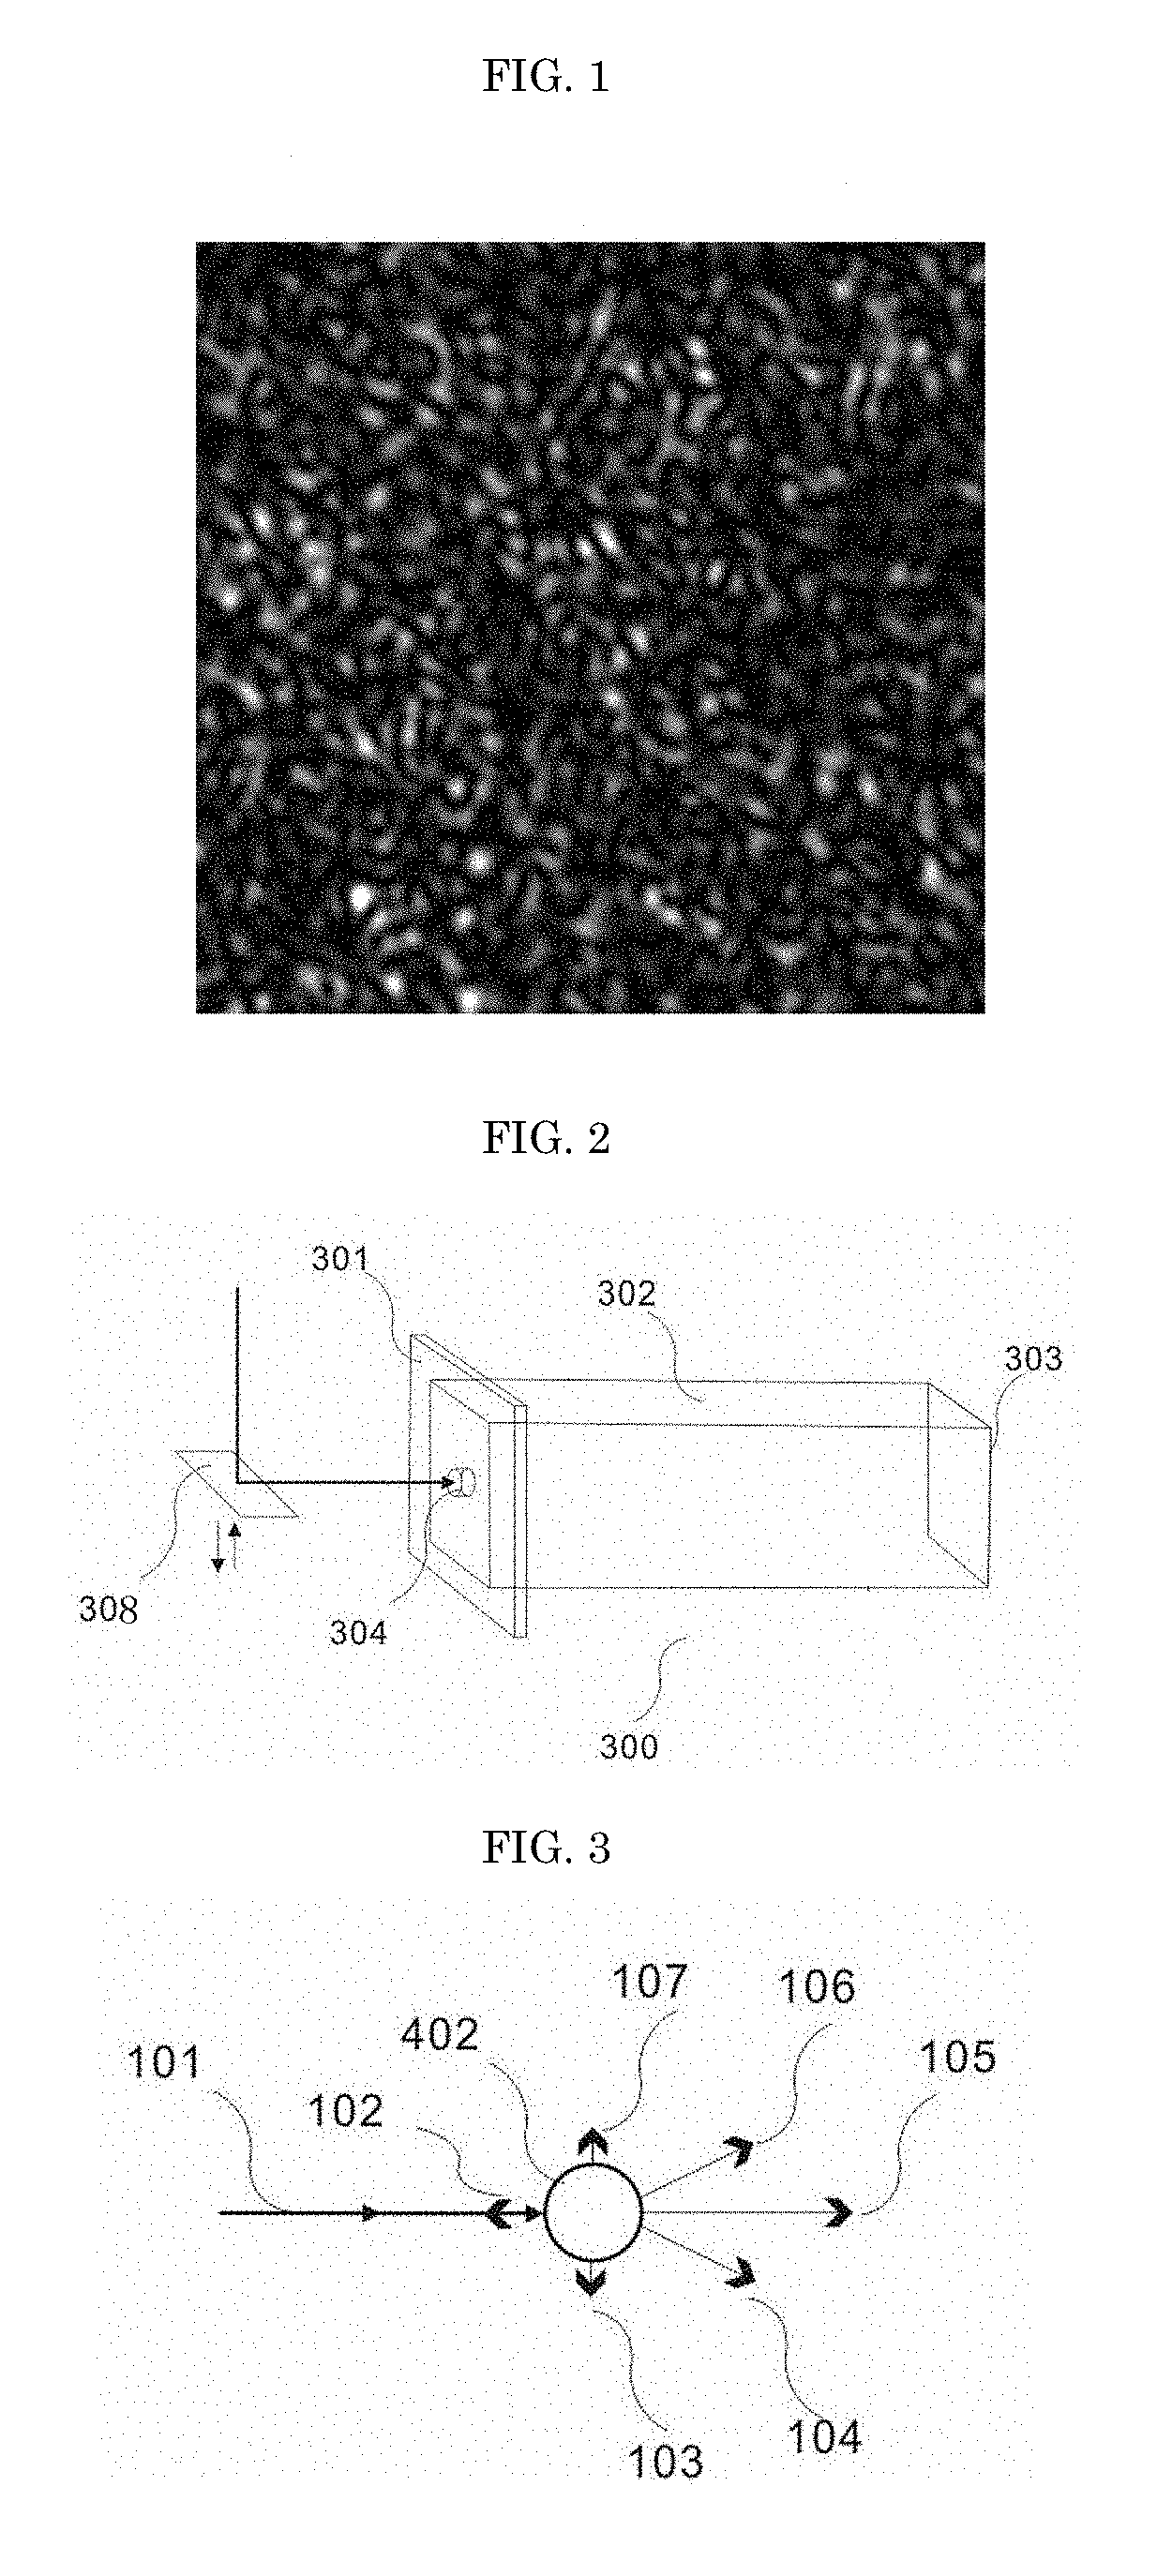 Speckle reduction apparatus based on Mie scattering, perturbation drive, and optical reflective chamber